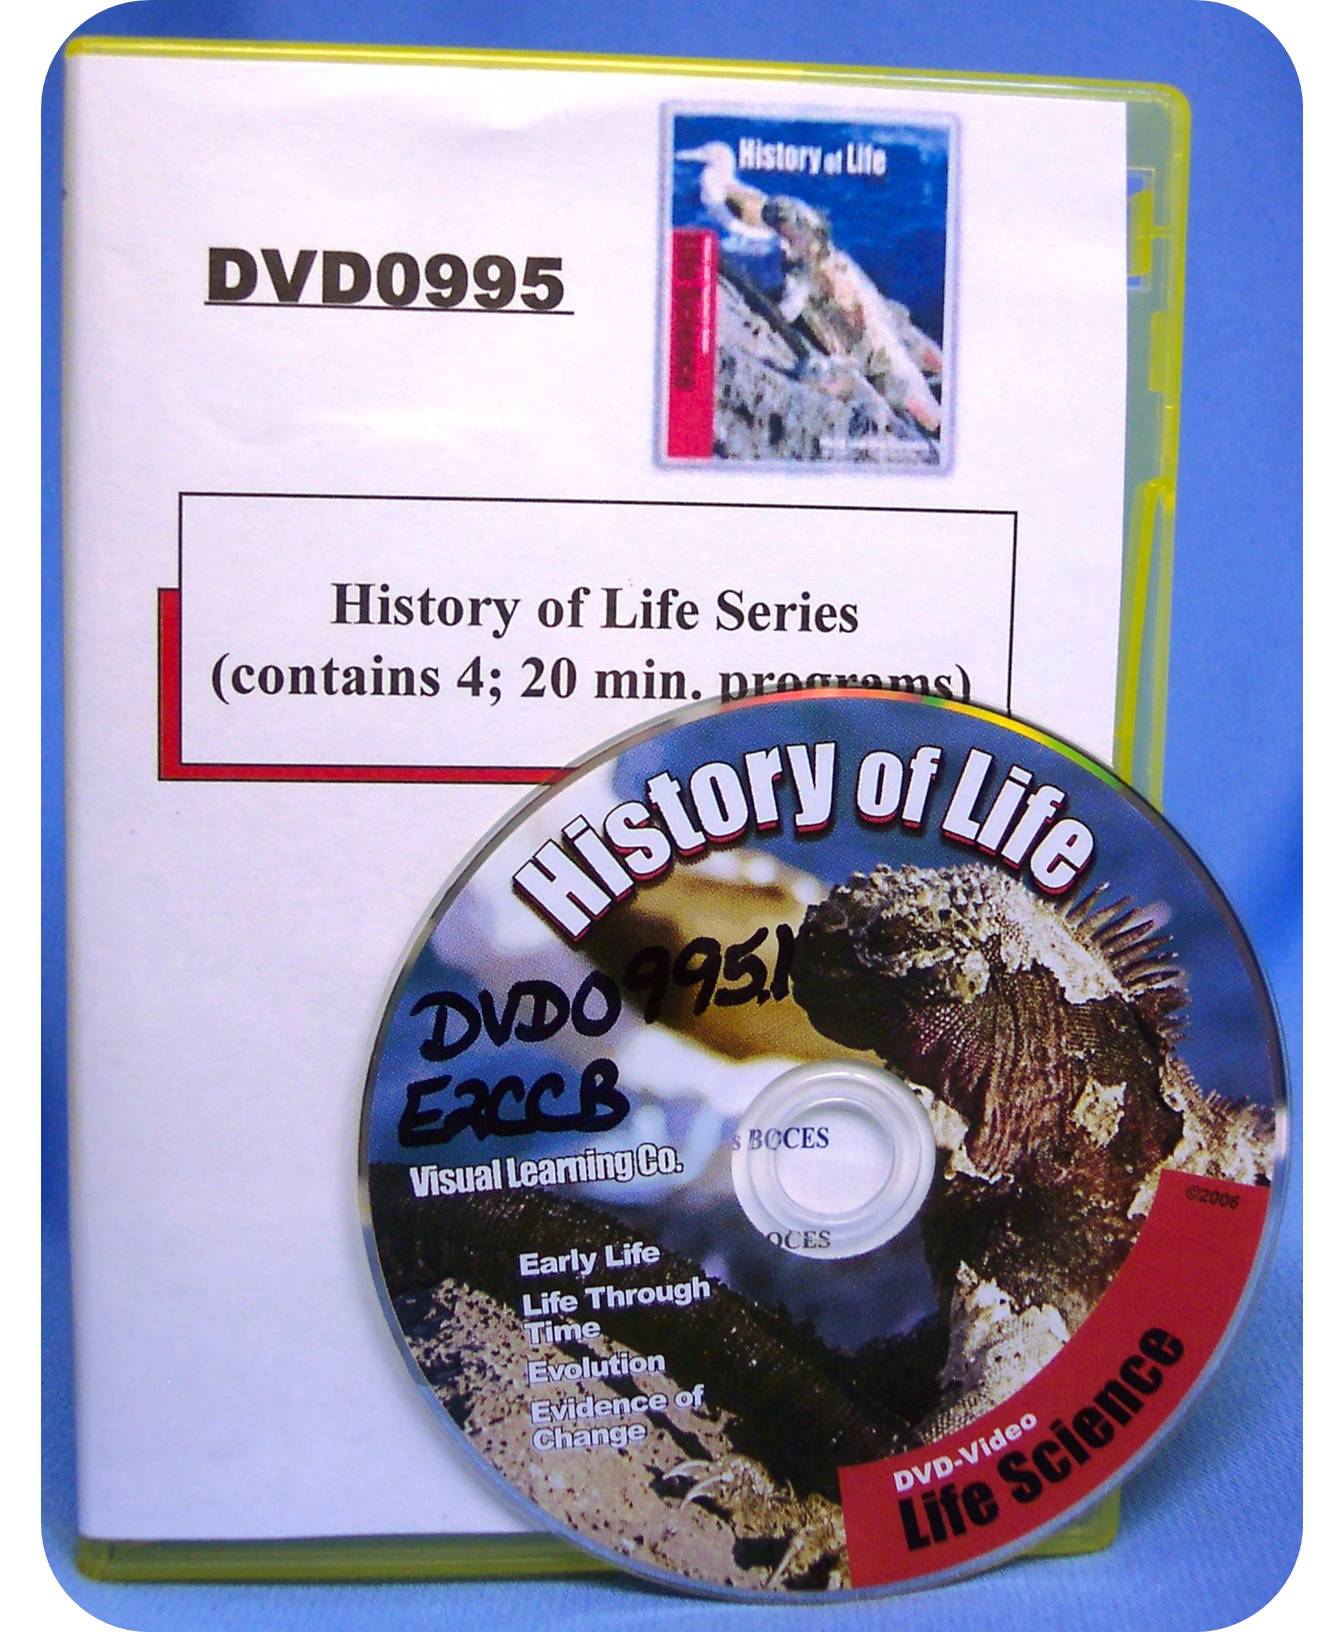 History of Life Series (contains 4; 20 min. programs)